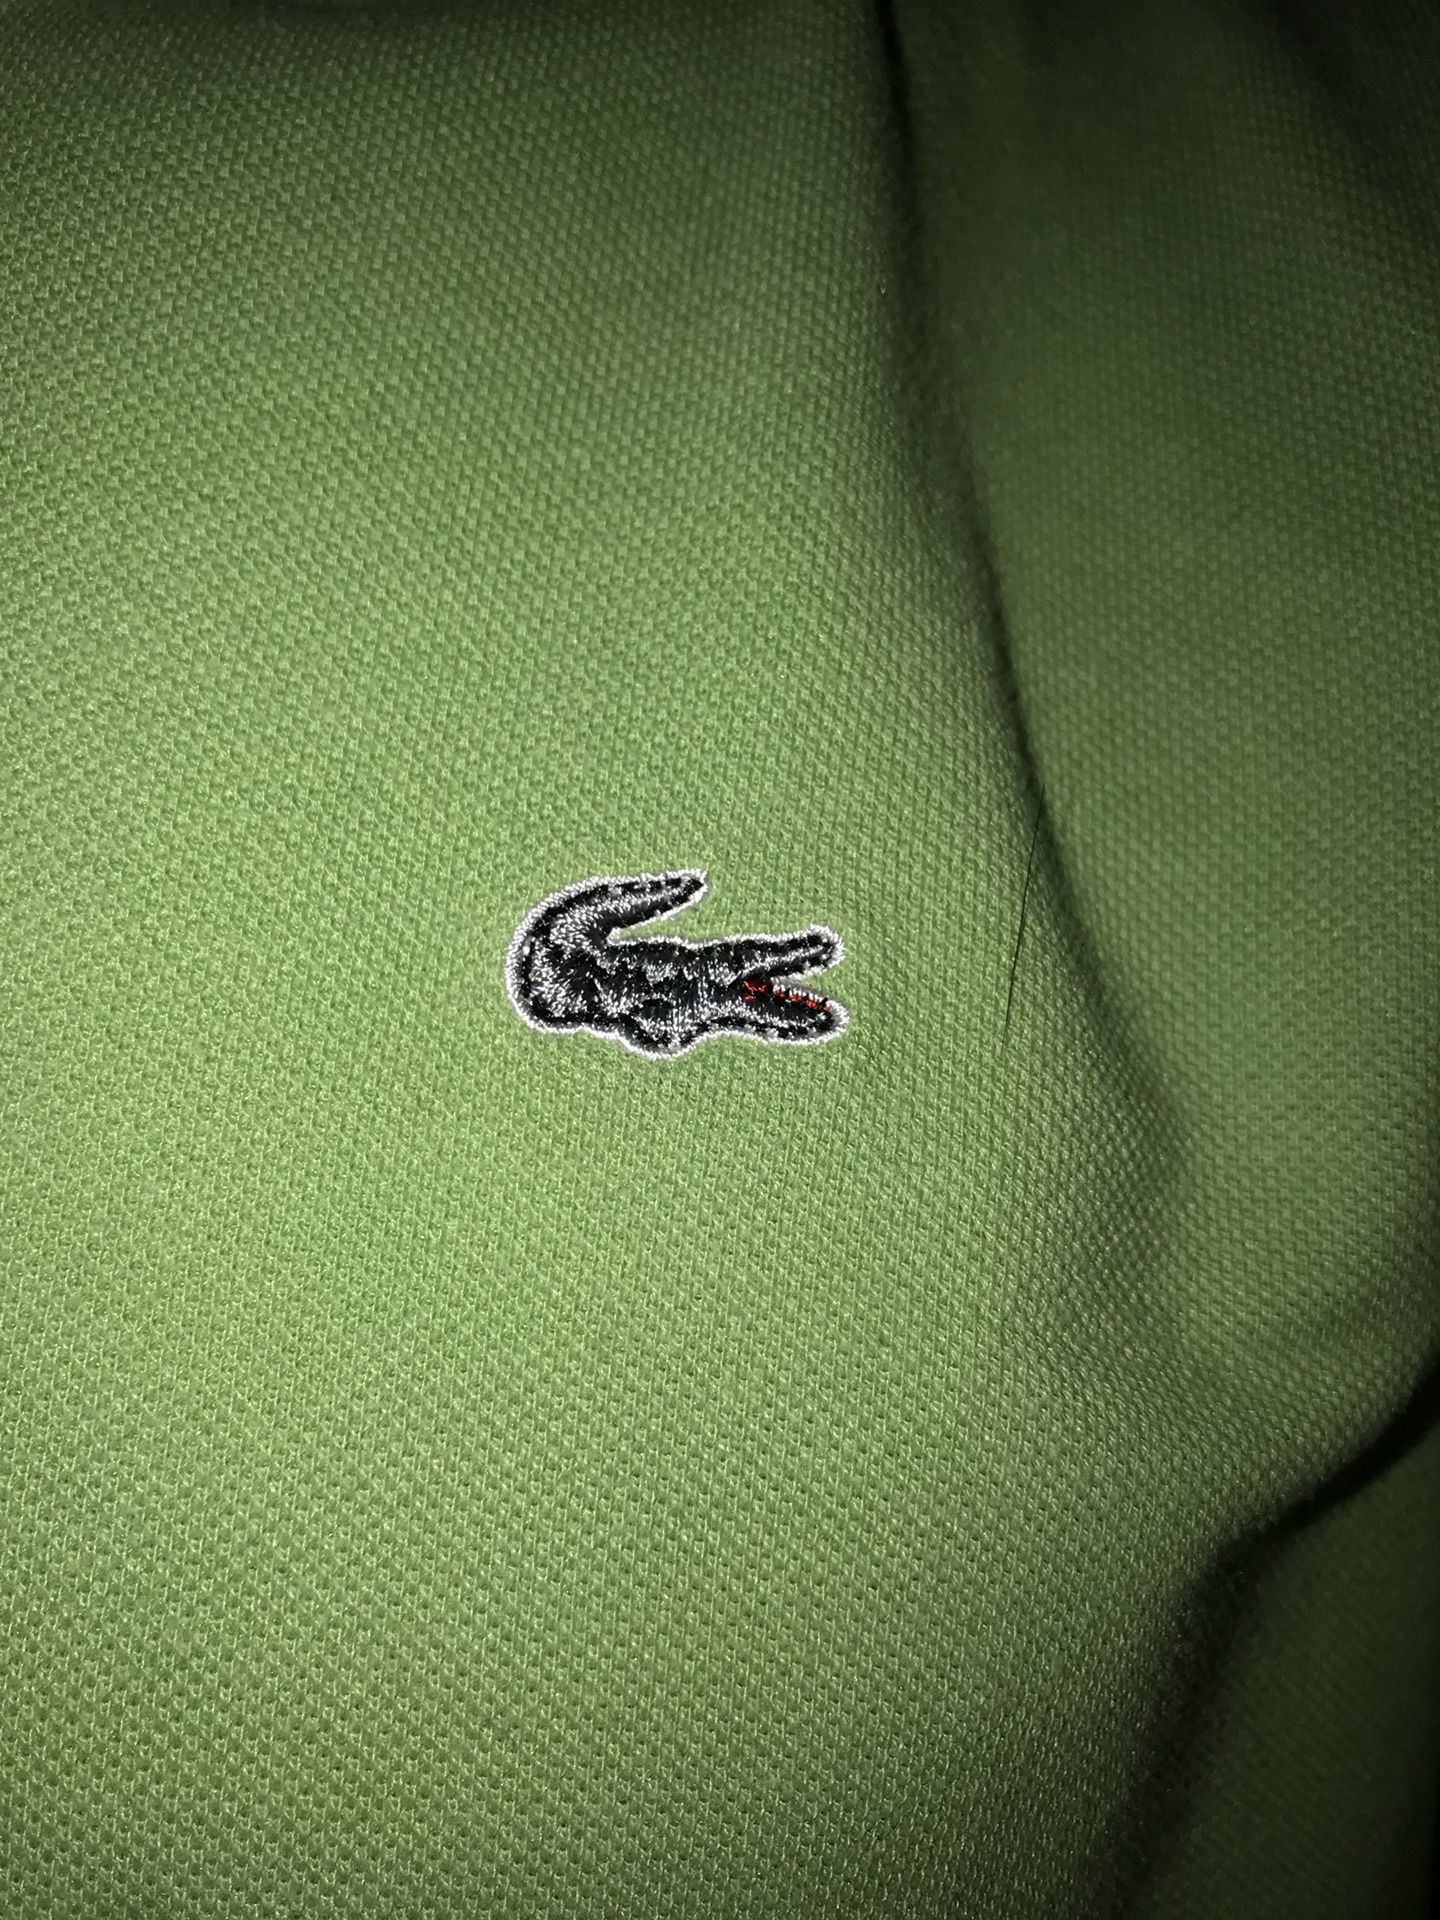 Lacoste Polo Shirt RN 87651-CA 16998 Size Large for Sale in Tempe, AZ ...